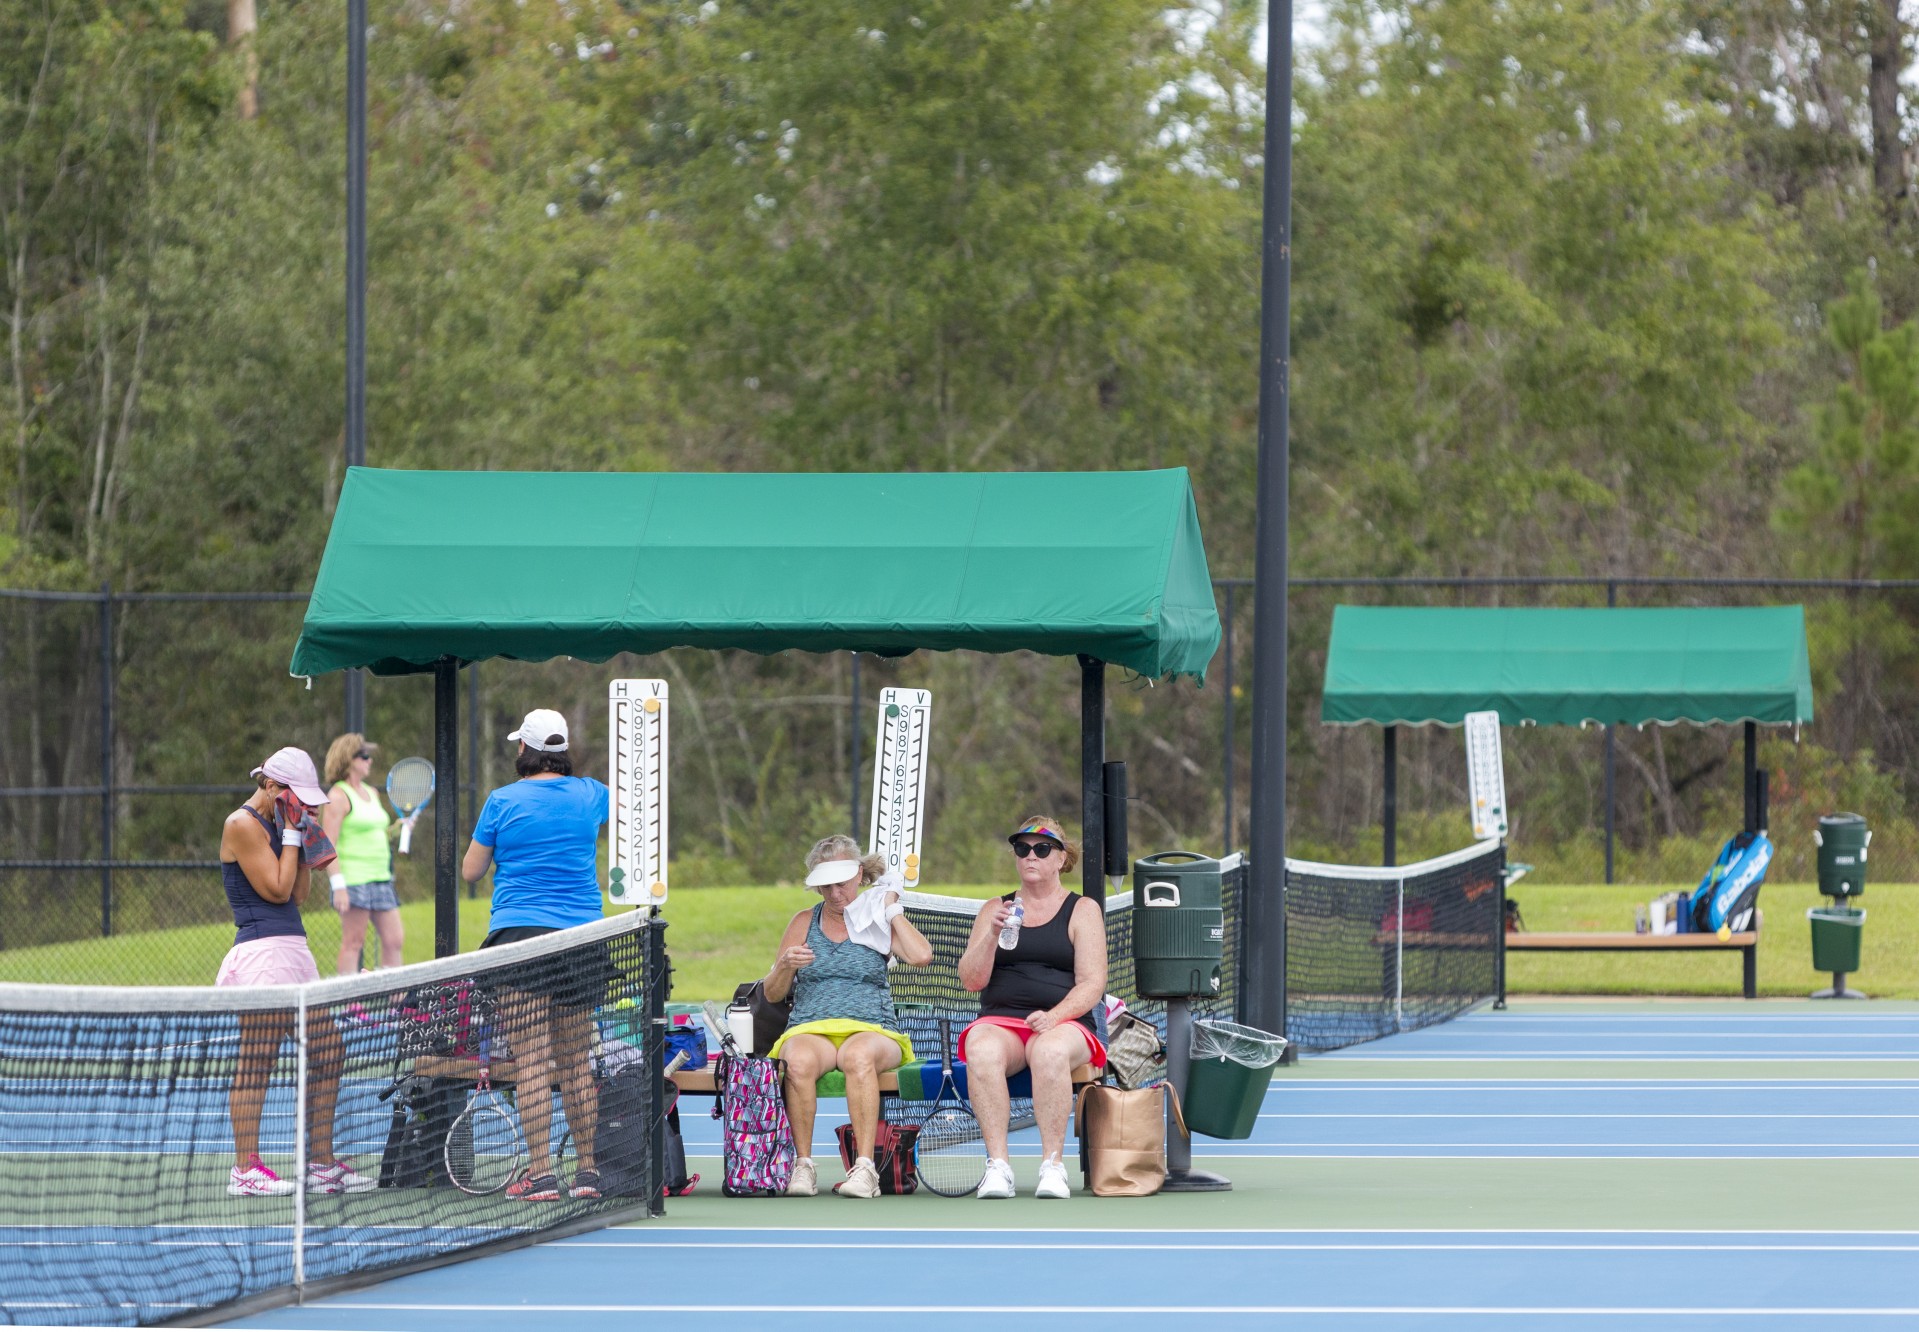 Our tennis center is home to 14 lighted hard surface tennis courts as well as pickle ball courts and serves as host to several tennis tournament each year.